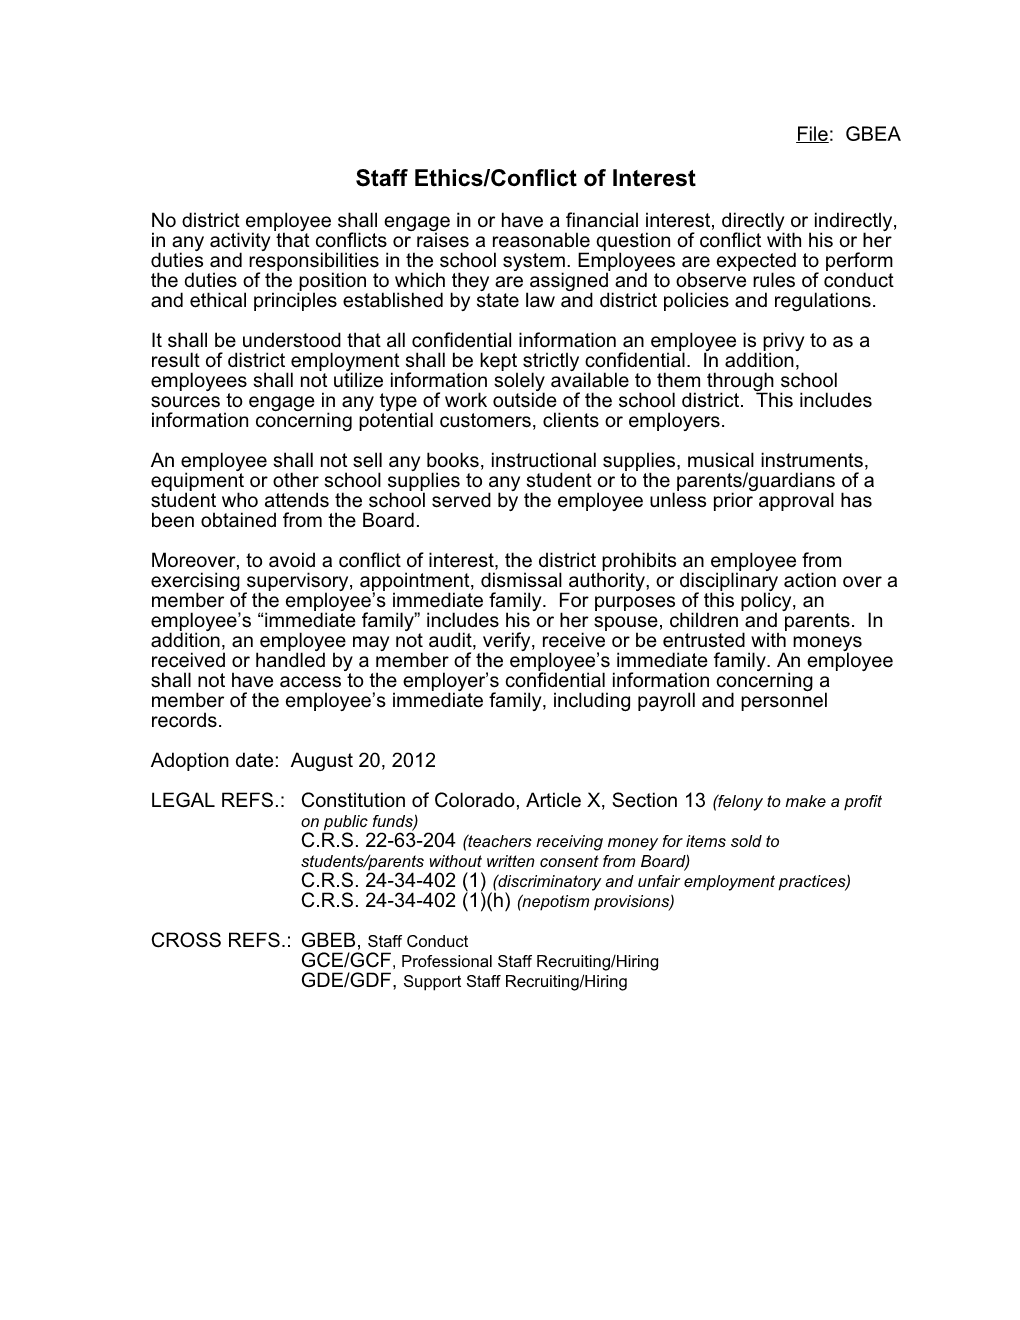 Staff Ethics/Conflict of Interest